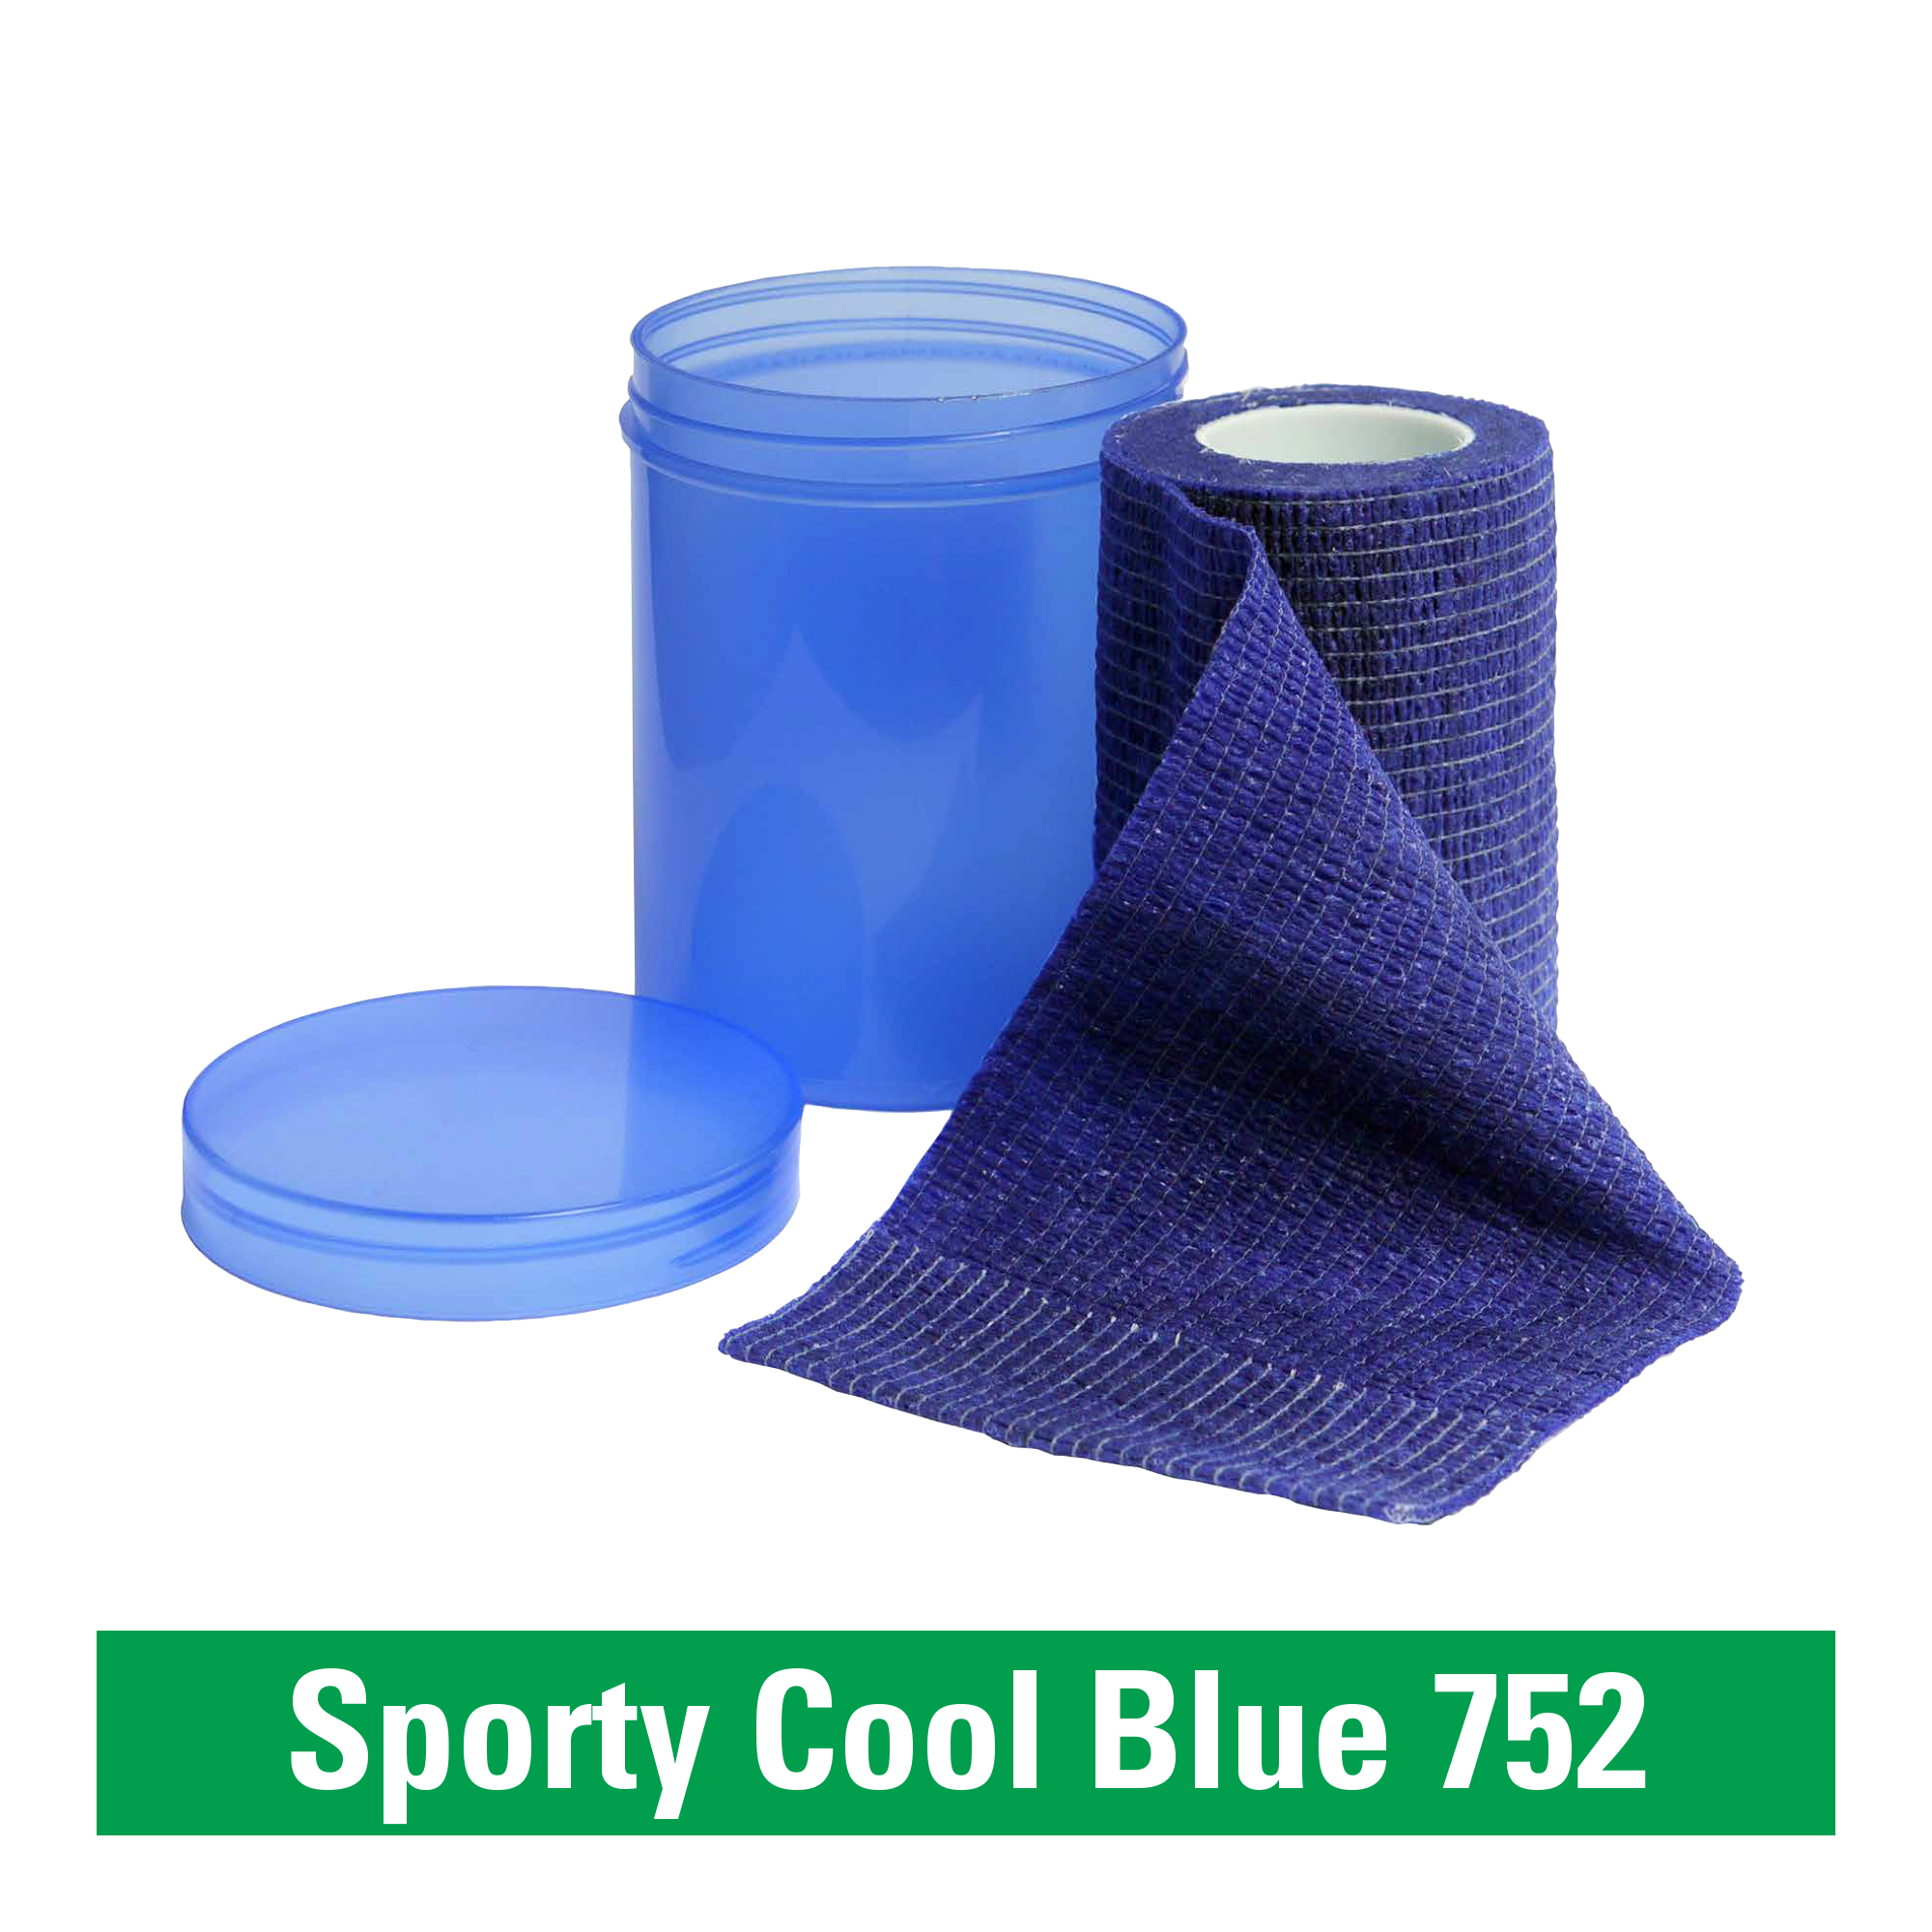 Sporty Cool Blue 752